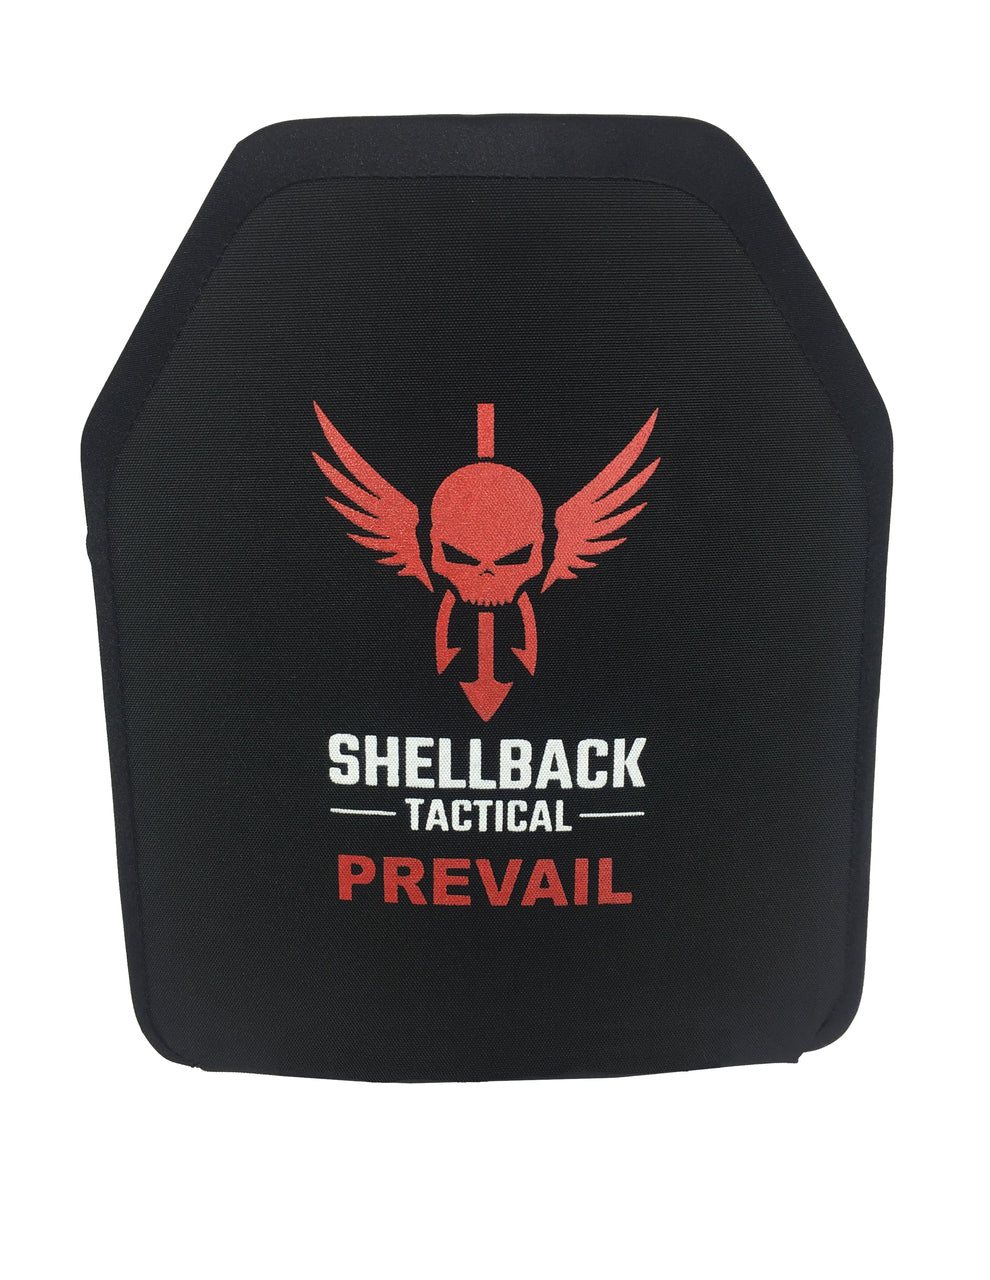 Shellback Tactical Prevail Series Level IV Single Curve 10 x 12 Hard Armor Plate - Model 1155.